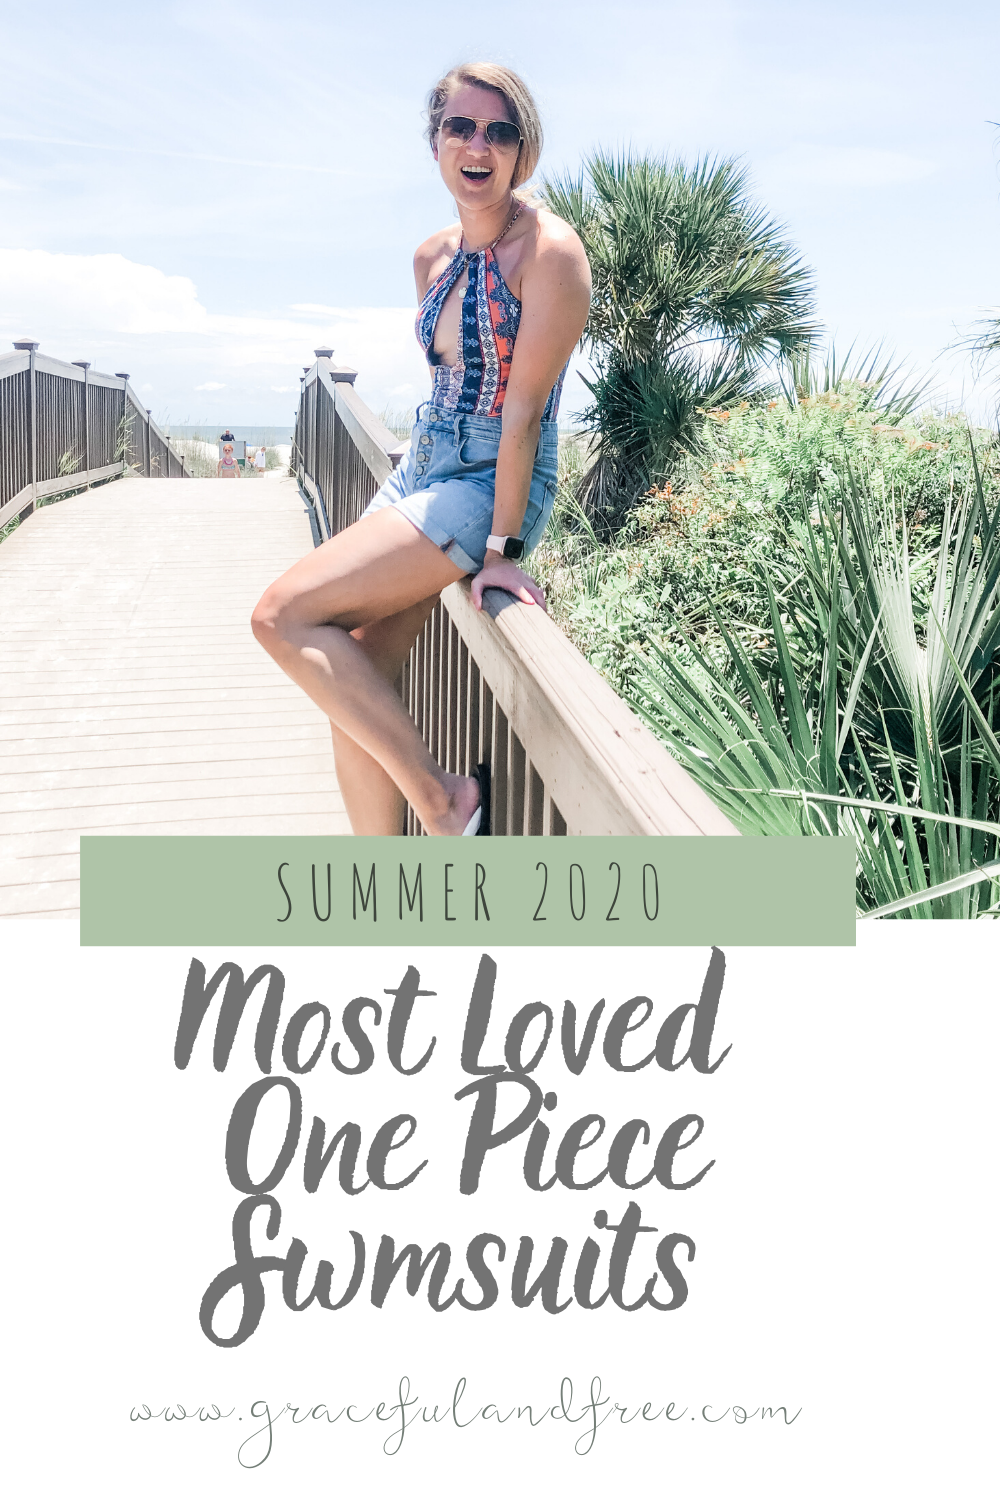 Season's Must-Have One Piece Swimsuits